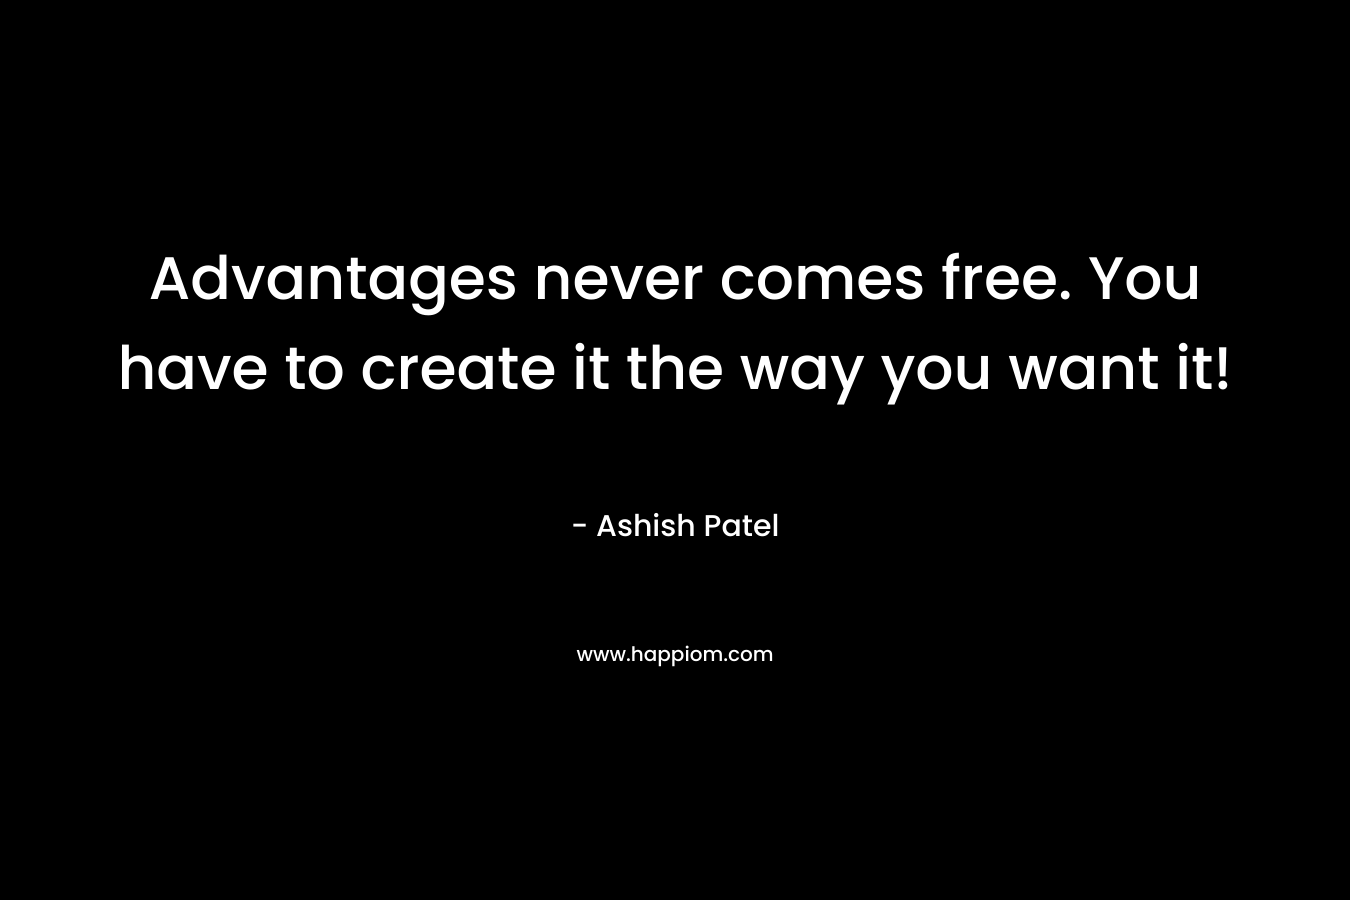 Advantages never comes free. You have to create it the way you want it! – Ashish Patel